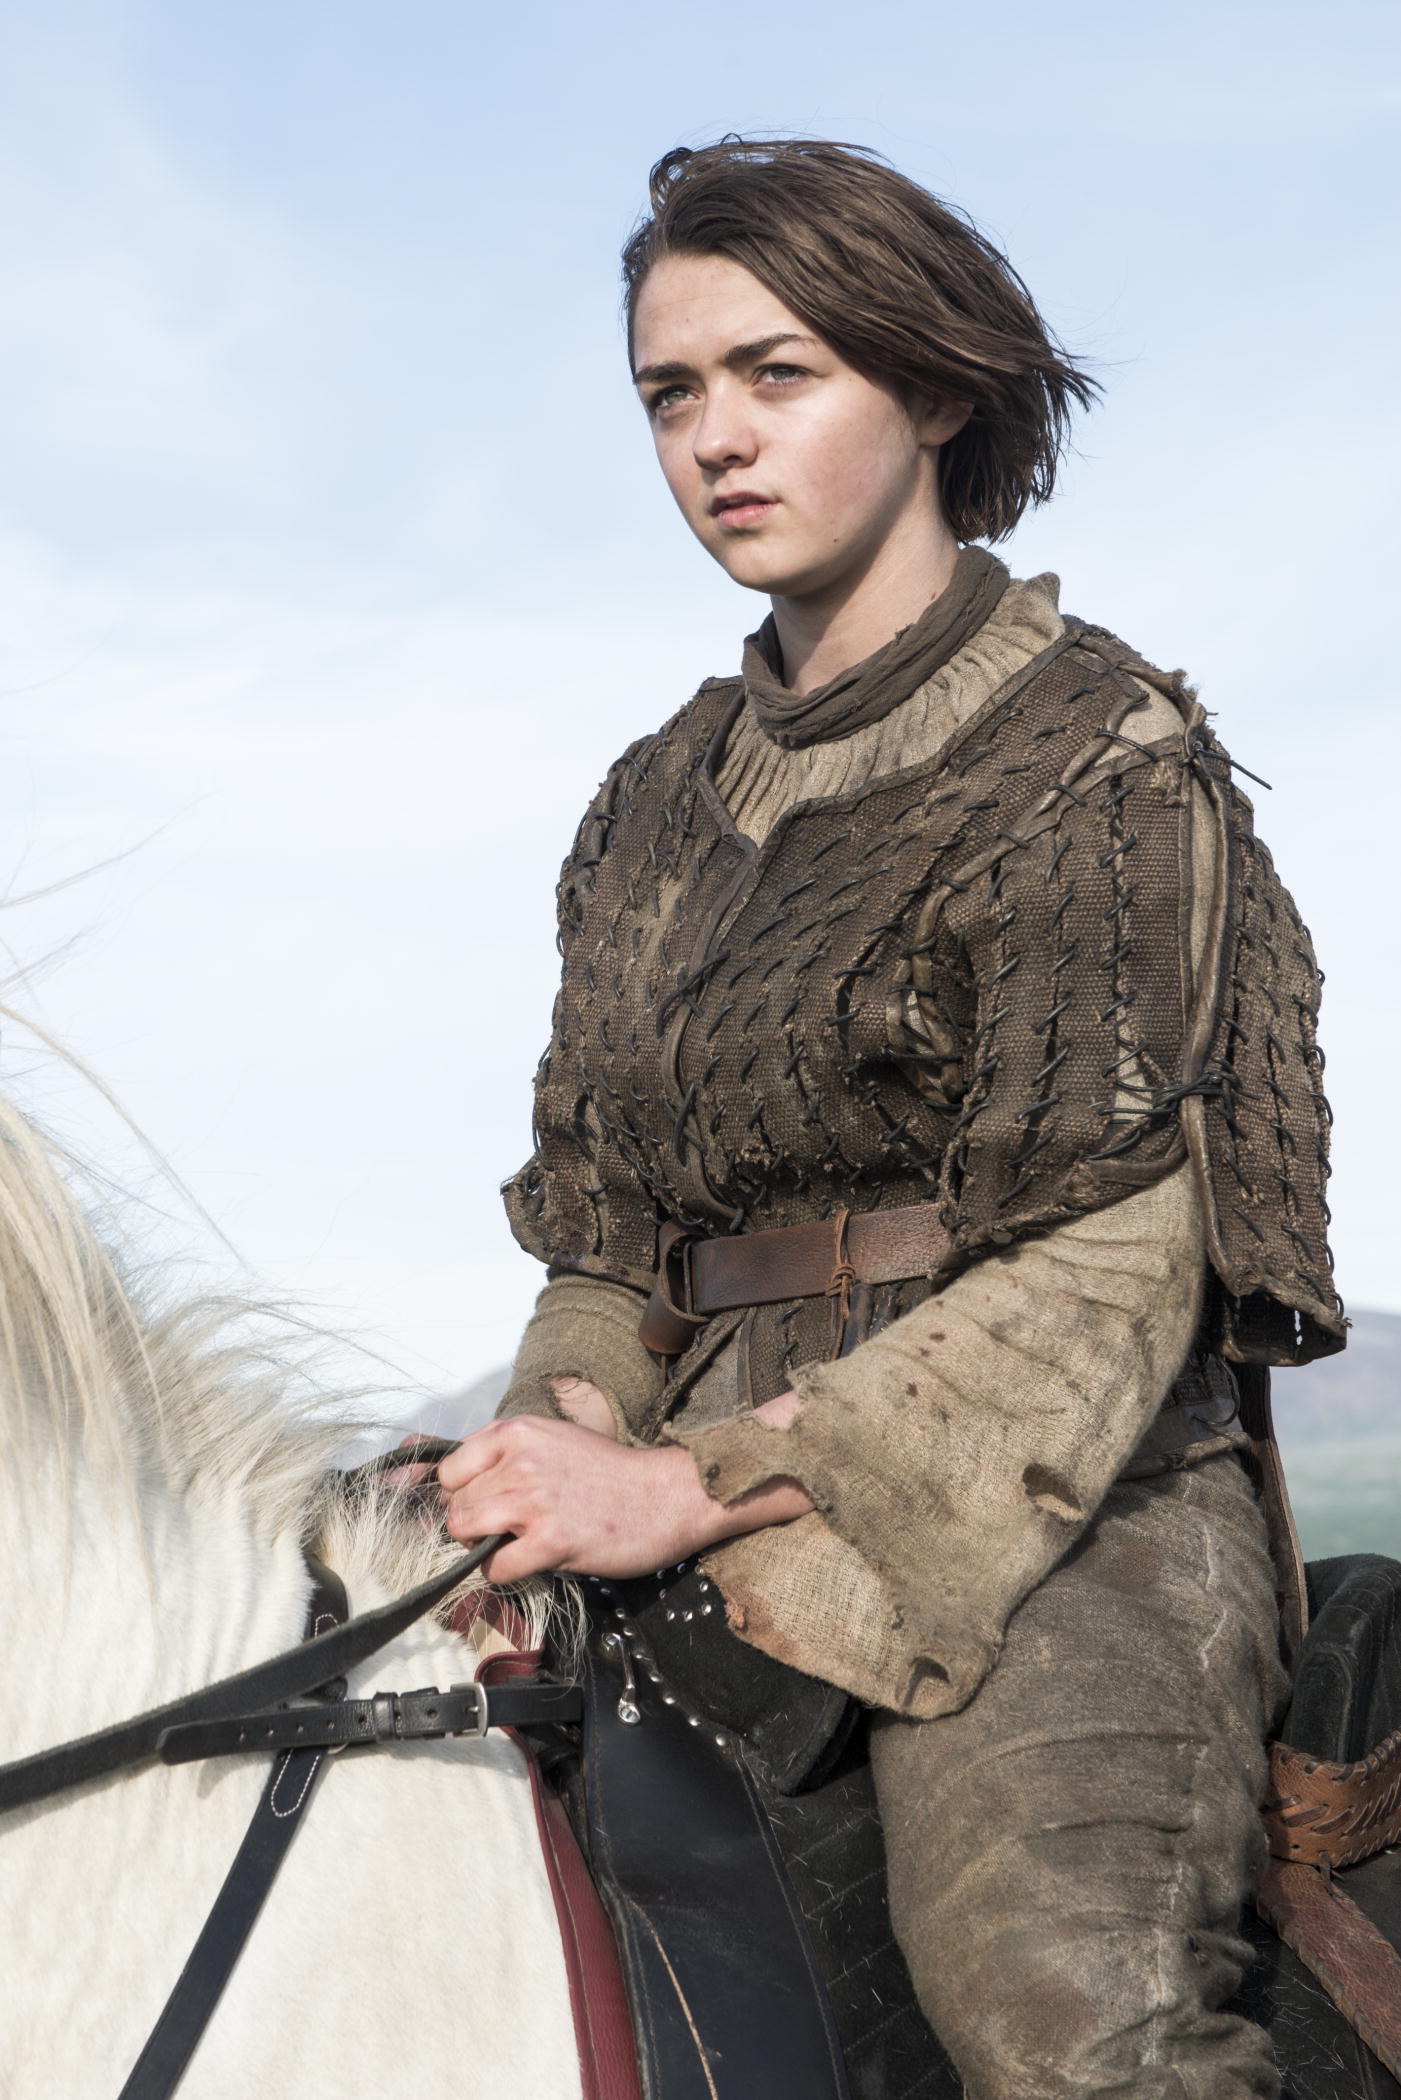 PHOTO: Maisie Williams as Arya Stark in a scene from "Game of Thrones."